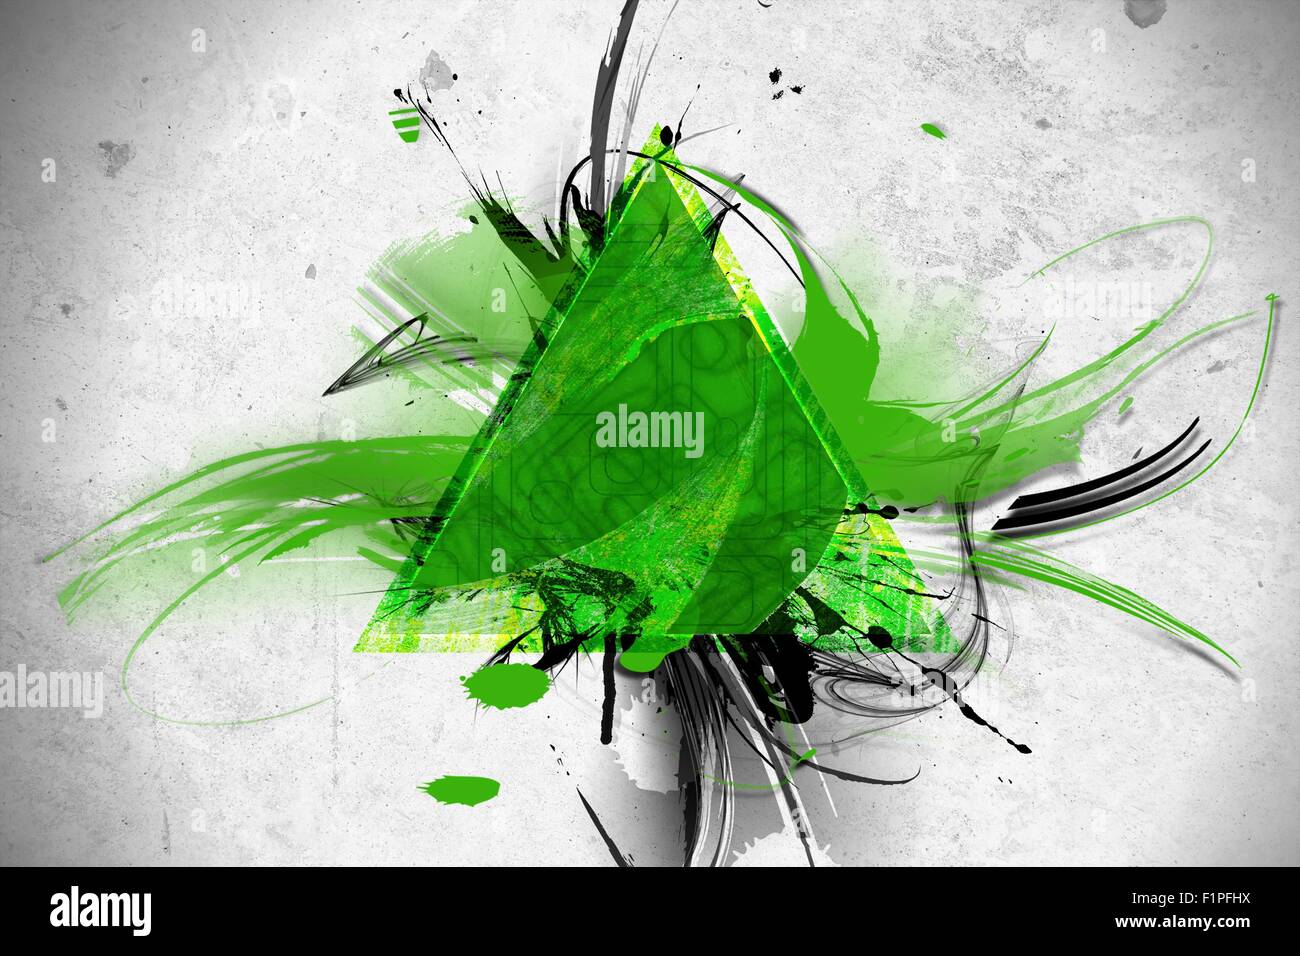 Green Triangle Abstract Illustration. Creative Illustration with Green Triangle and Many Design Elements. Great Spot for a Logo Stock Photo